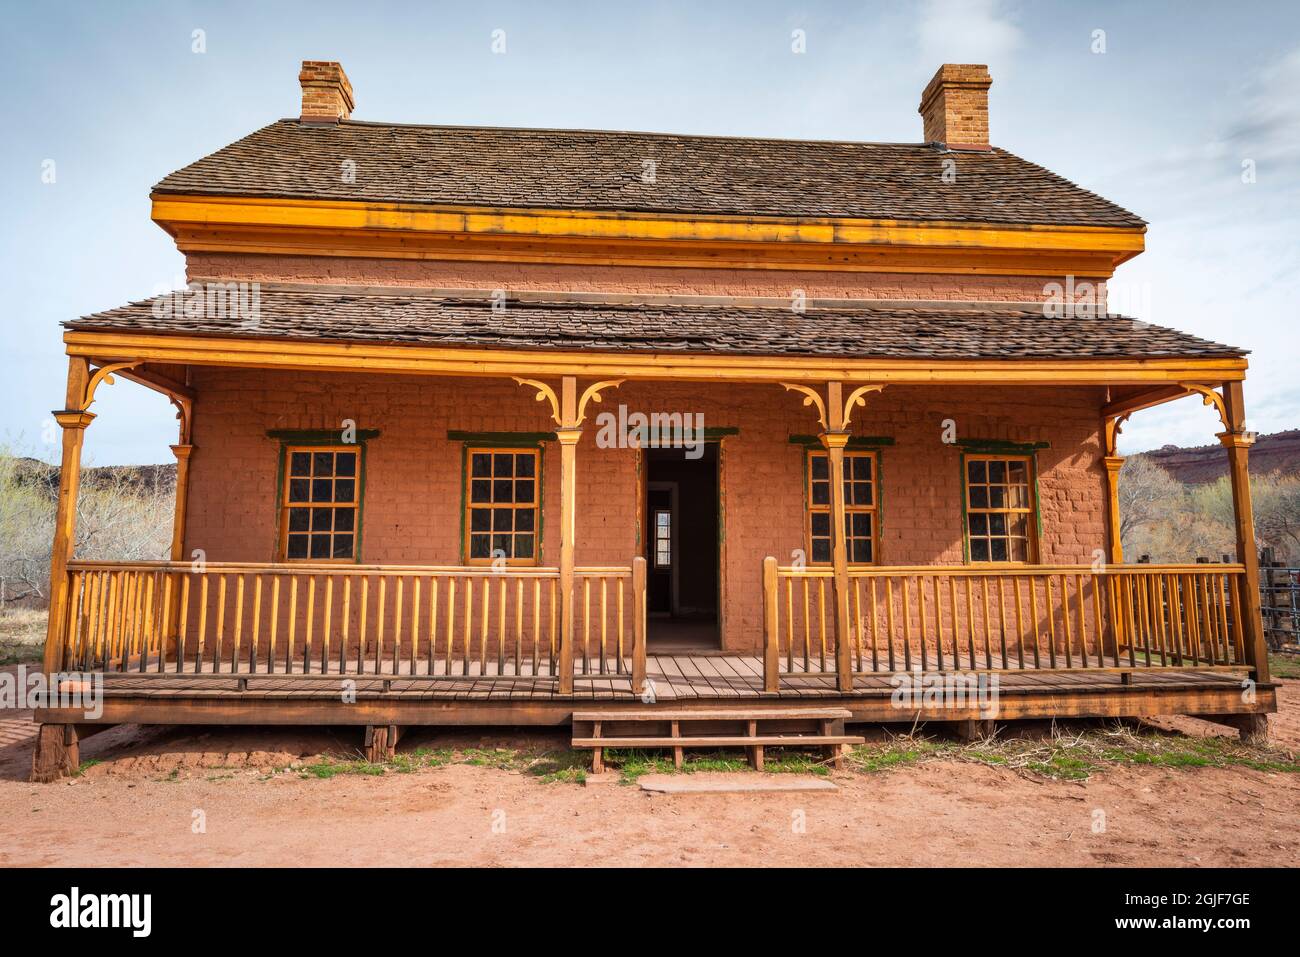 Alonzo Russell adobe house (featured in the film 'Butch Cassidy and the Sundance Kid'), Grafton ghost town, Utah, USA. Stock Photo